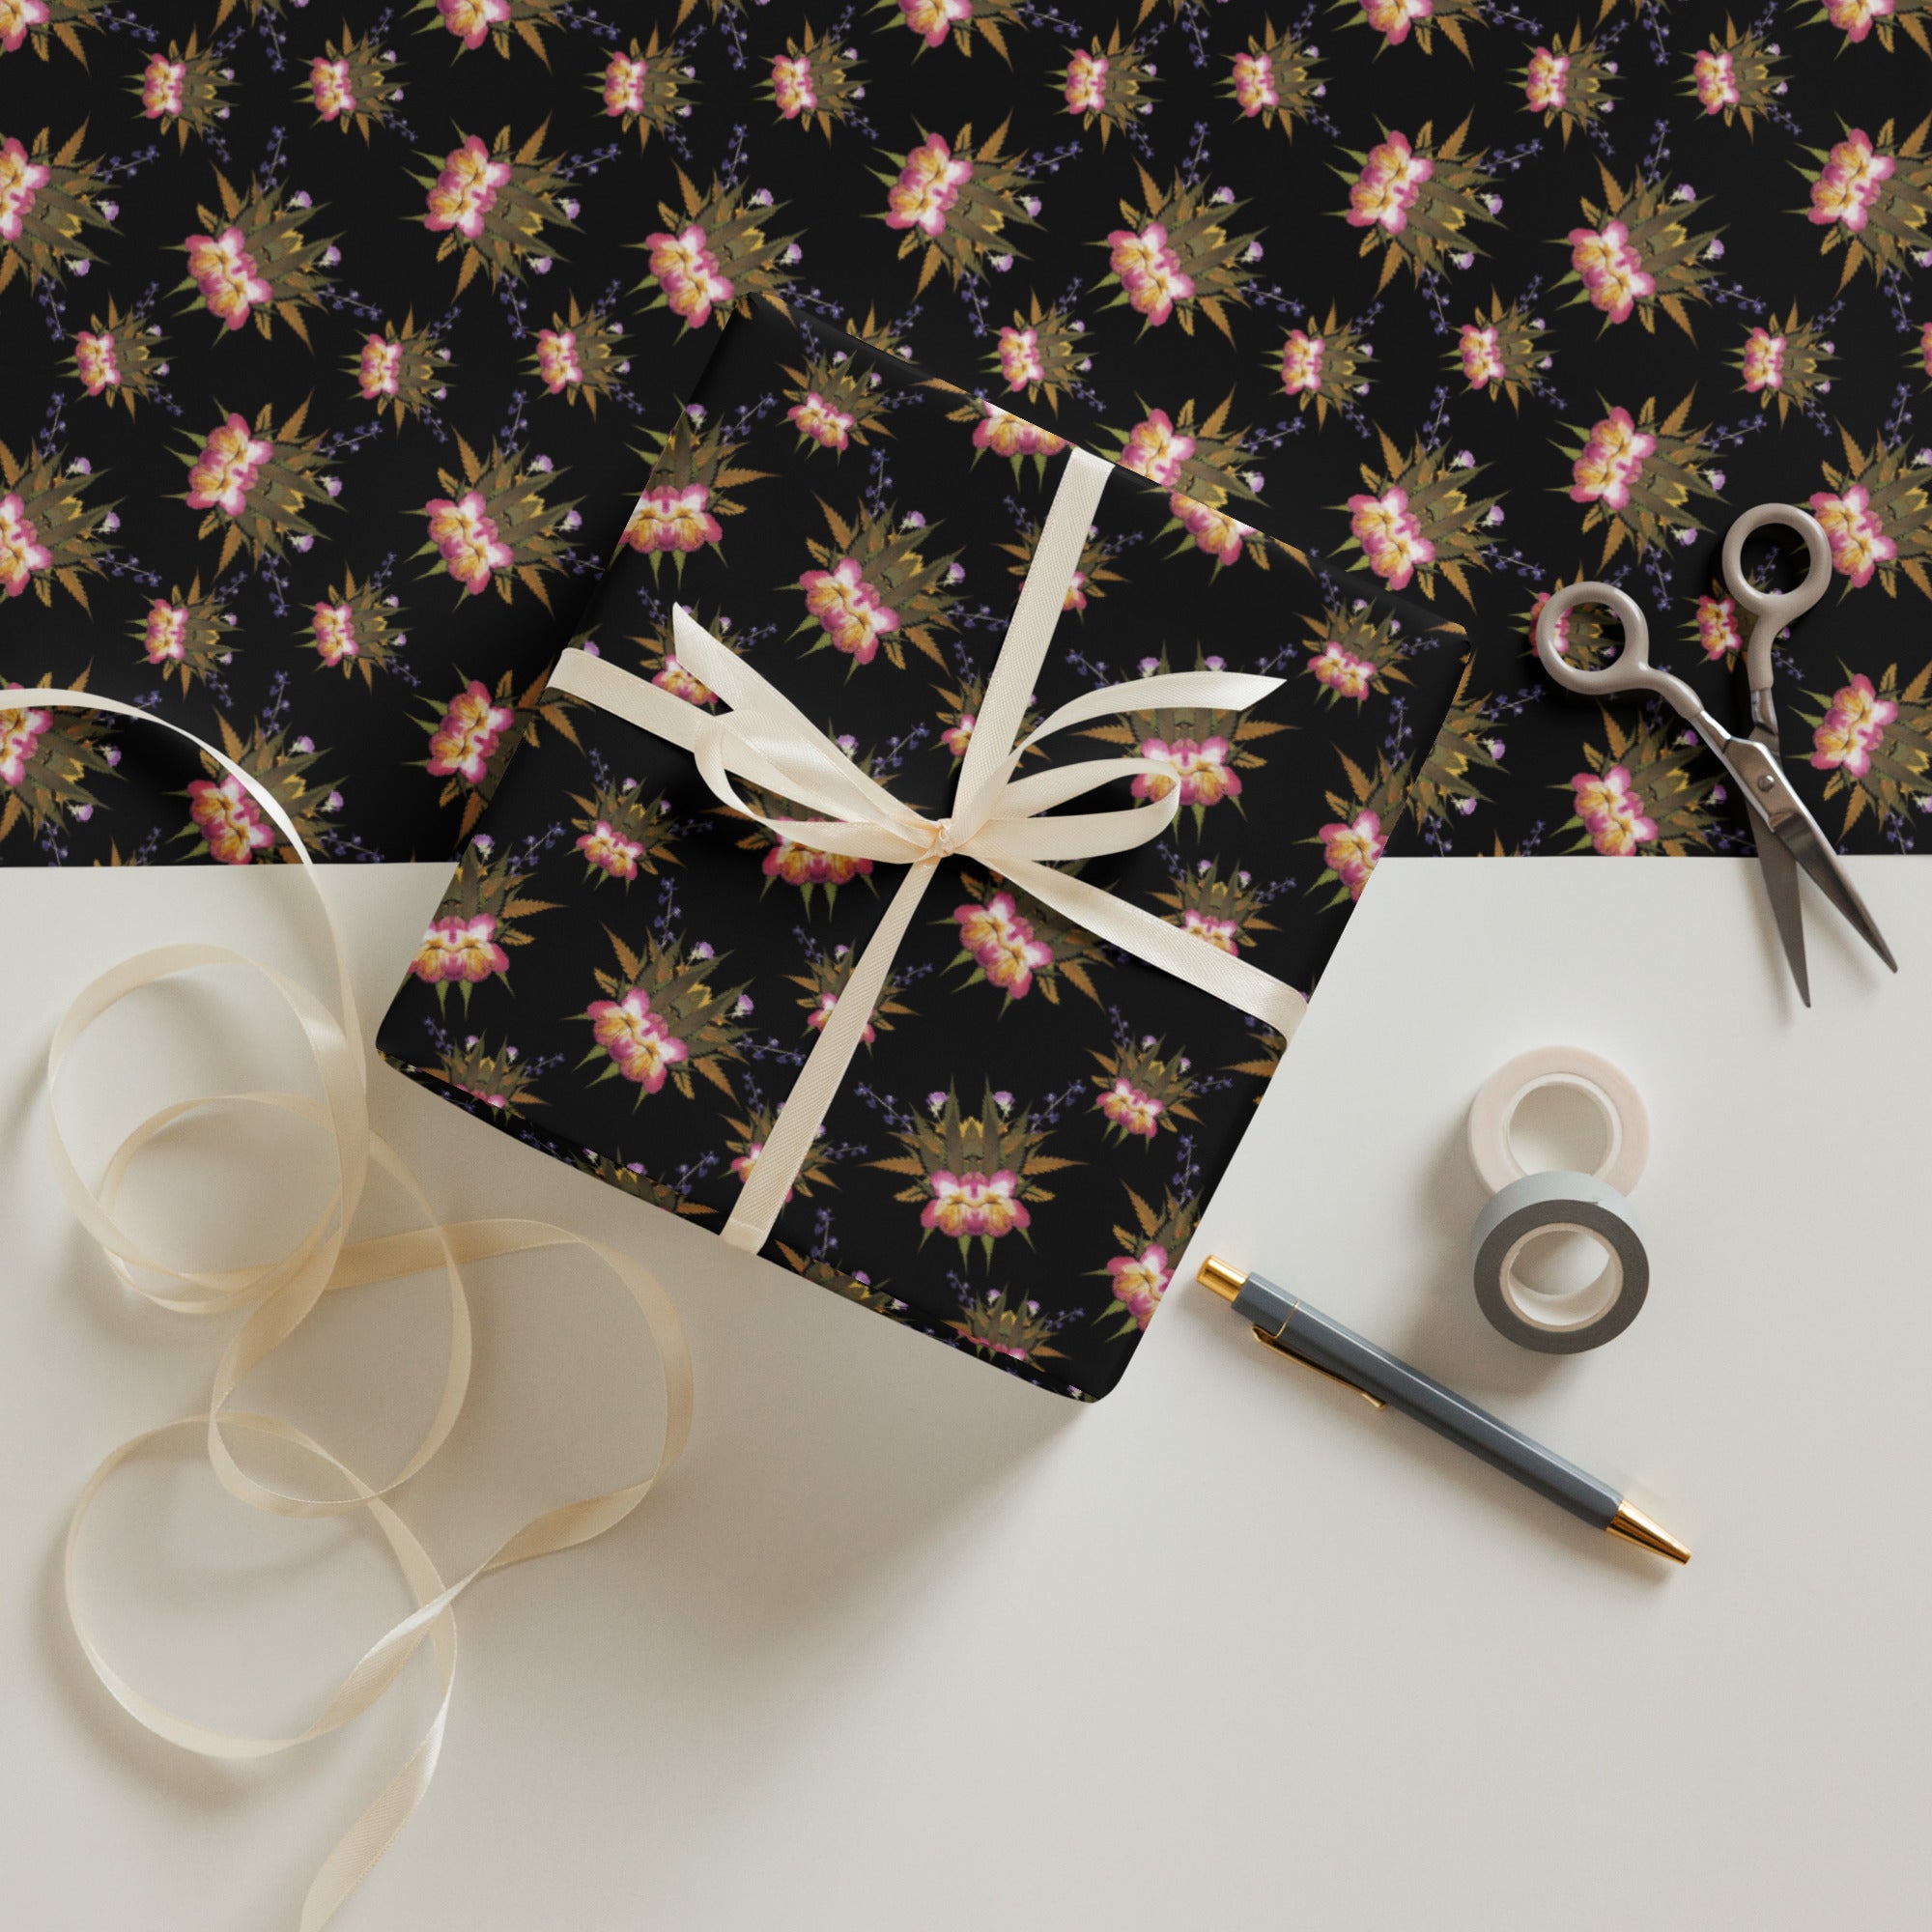 Smoochie Boochie (Midnite) Wrapping paper sheets